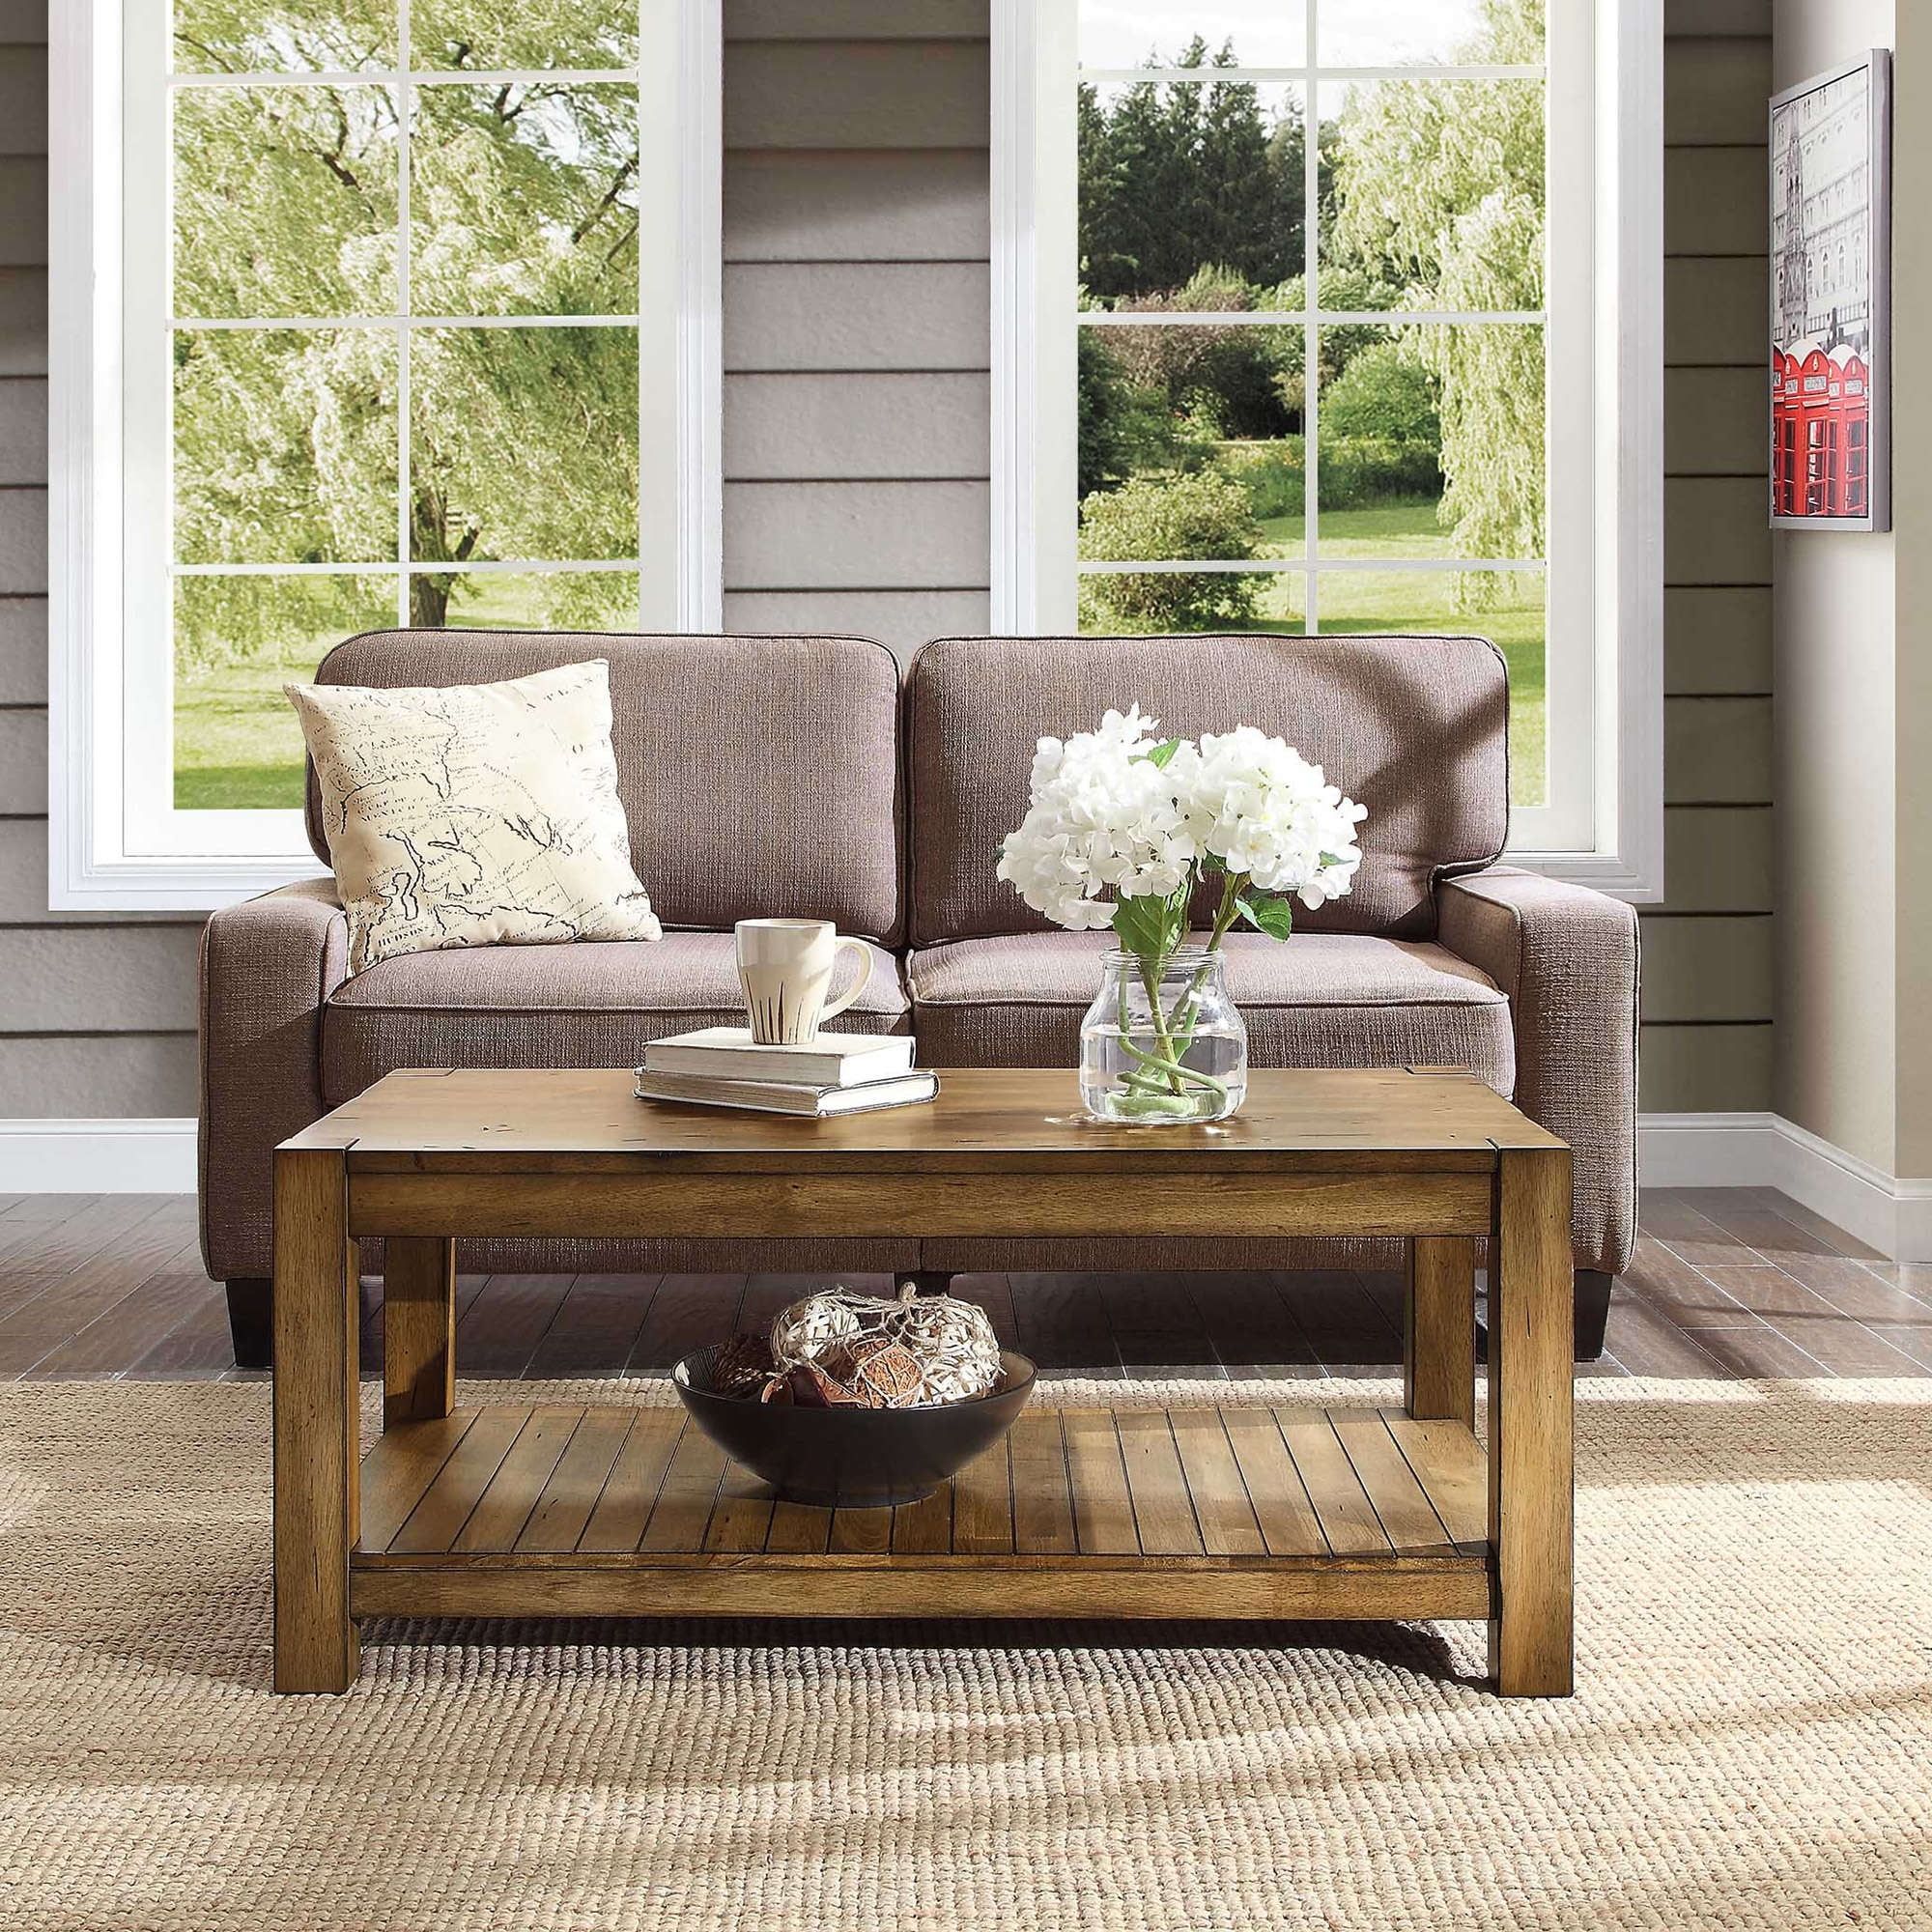 Better Homes & Gardens Bryant Solid Wood Coffee Table, Rustic Maple Brown  Finish – Walmart With Brown Rustic Coffee Tables (View 6 of 15)